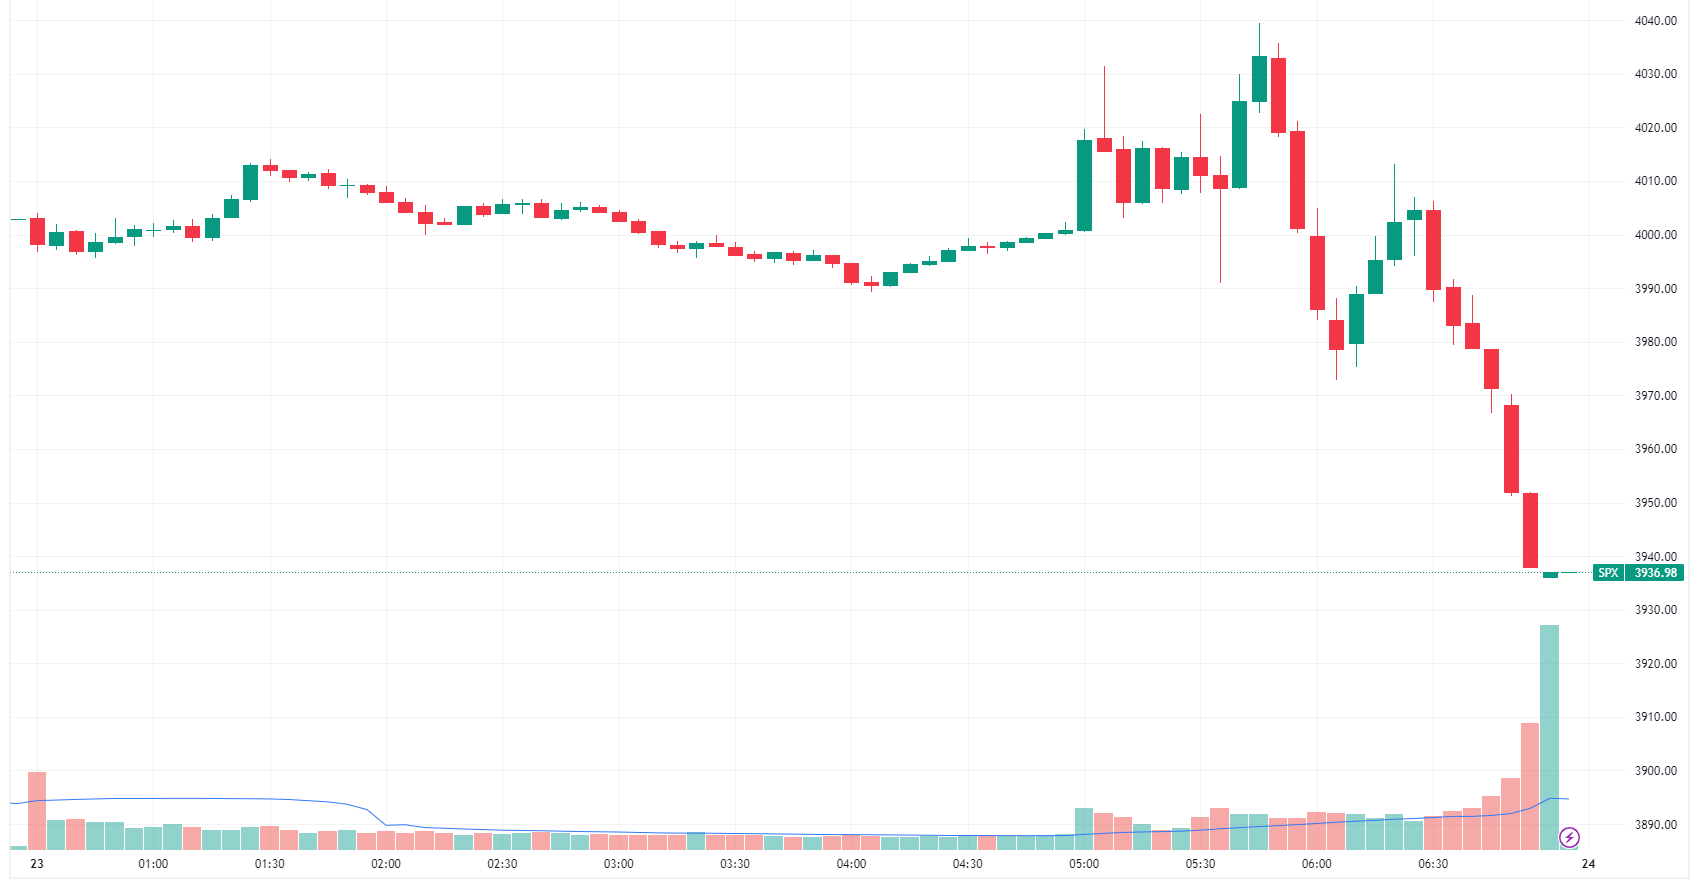 Powell’s attempt at a dovish hike sends the market spiraling lower (Source: TradingView)